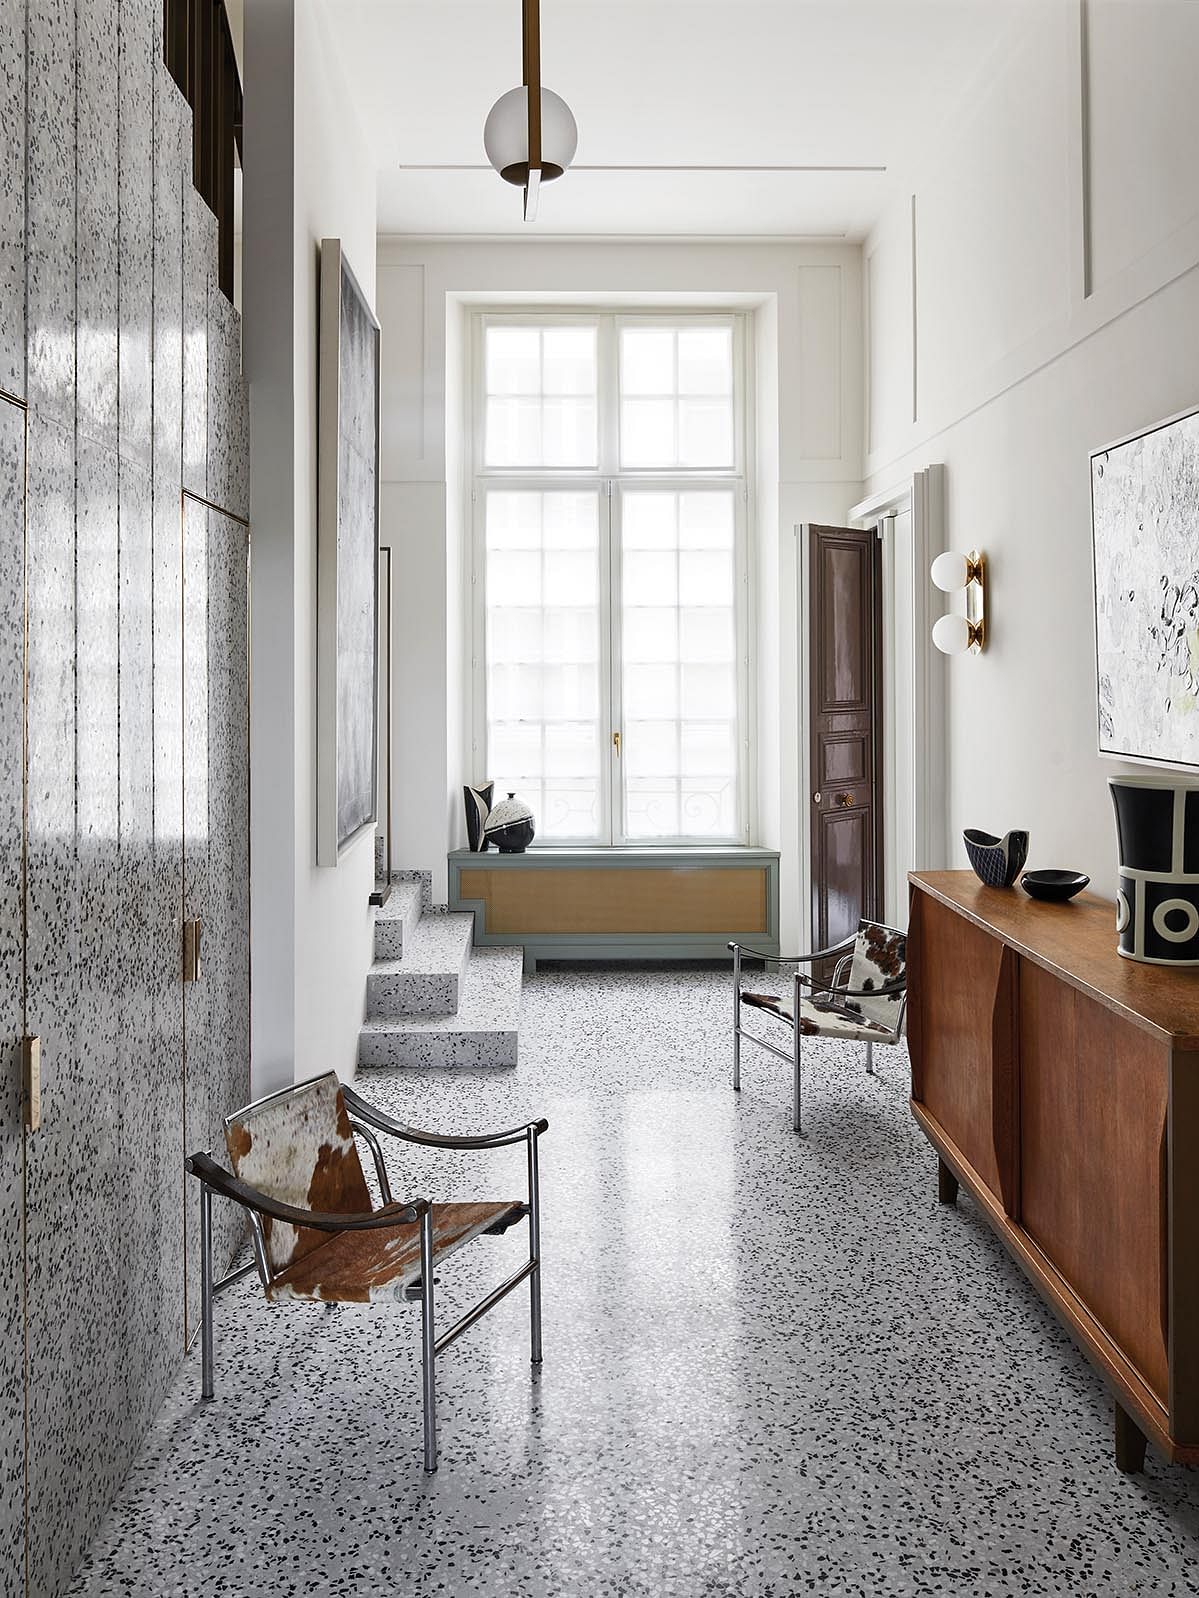 The hallway is a carefully orchestrated composition comprising Le Corbusier Sling chairs (1950), a Jean Prouvé chest, Subway drawings by Keith Haring and ceramics by Georges Jouve and Olivier Gagnère against a terrazzo floor.